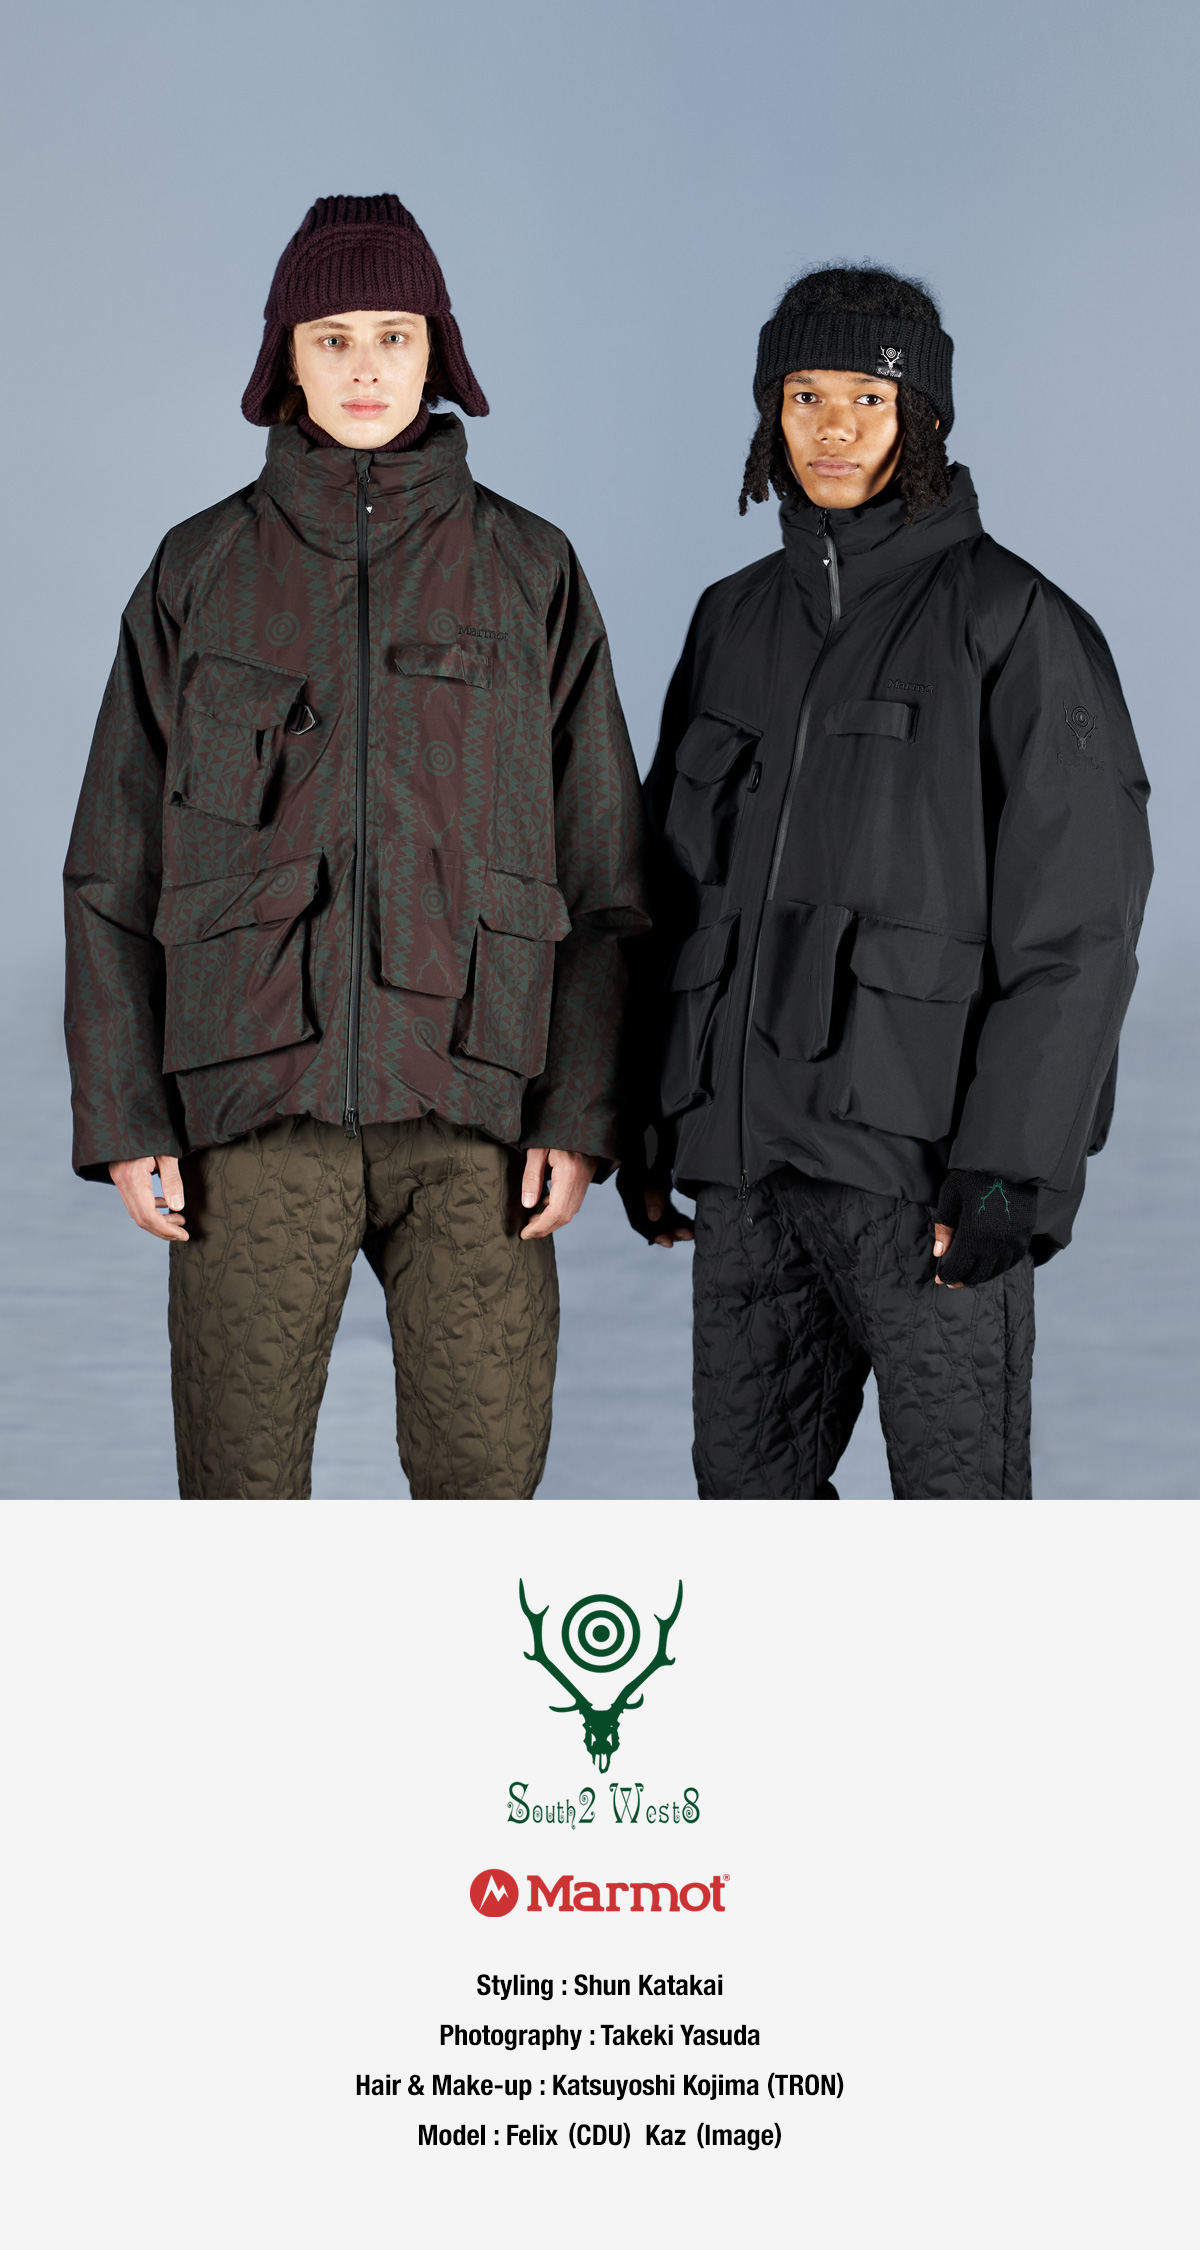 South2 West8 × Marmot COLLABORATION PRODUCTS